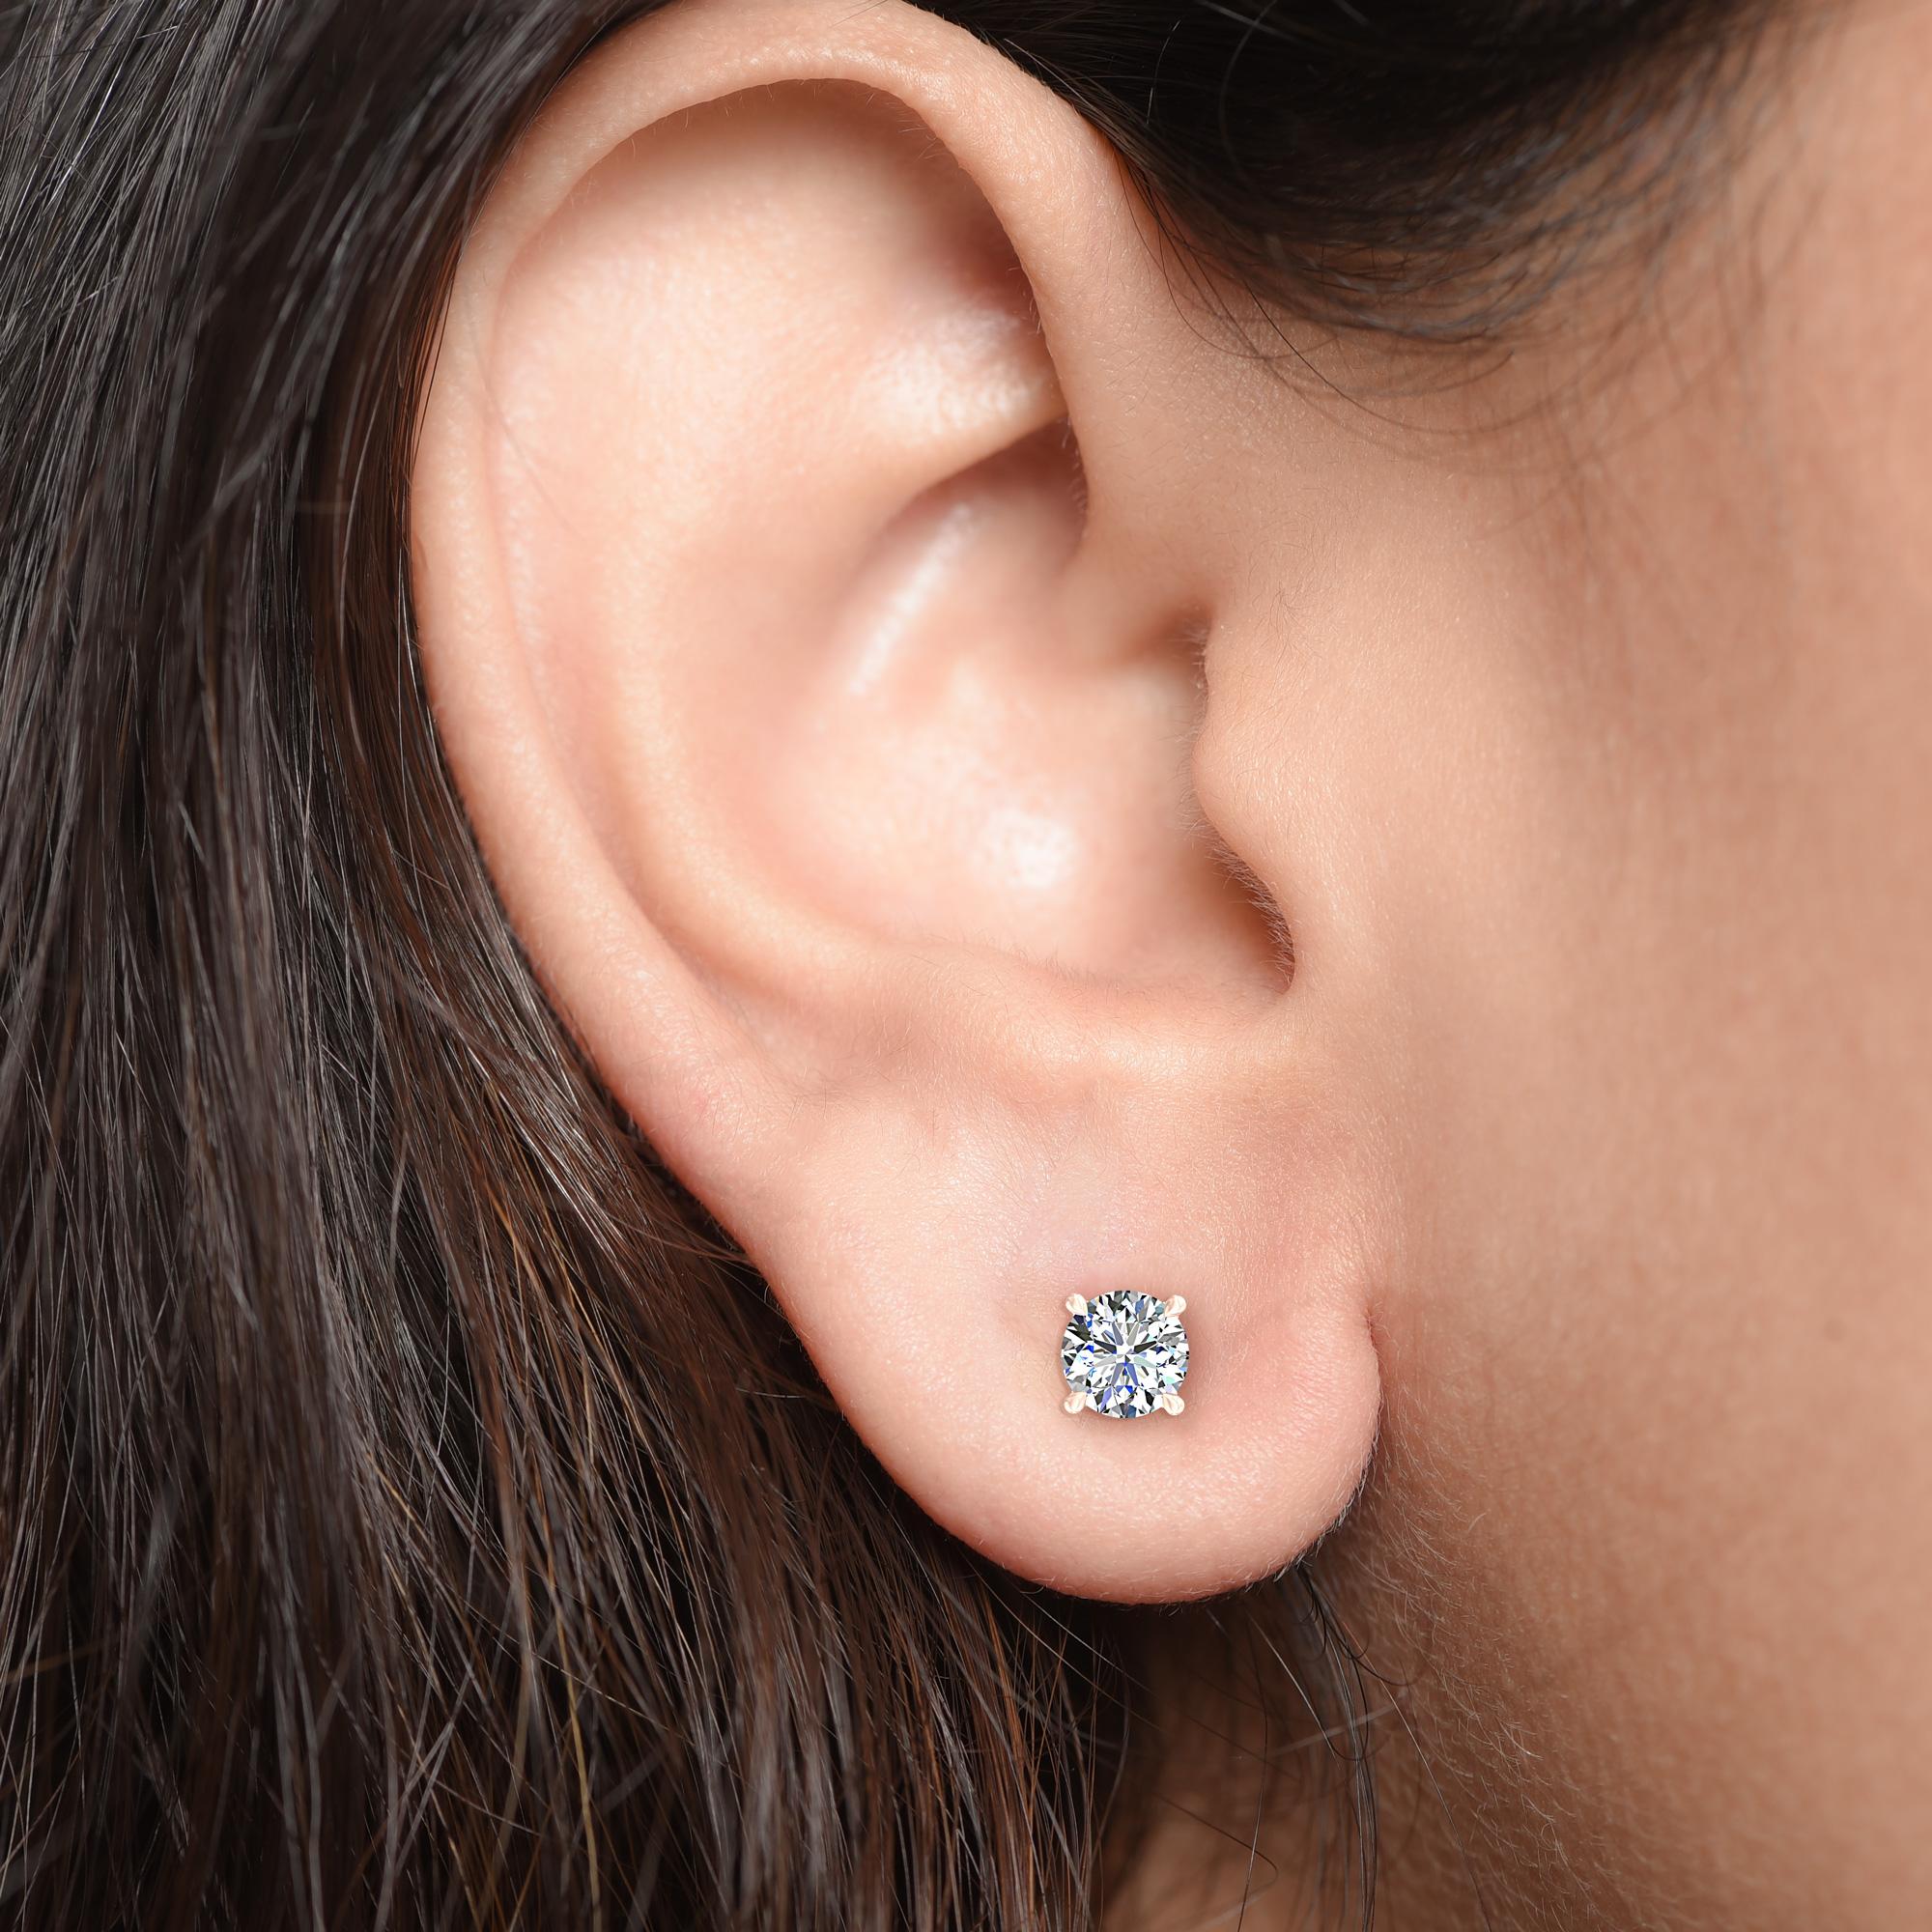 These classic GIA certified diamond studs showcase a pair of perfectly matched diamonds weighing total 0.80 carats. Crafted in 18-karat rose gold, these four prong earrings are available in yellow and white gold as well.

Perfect for gifting and for